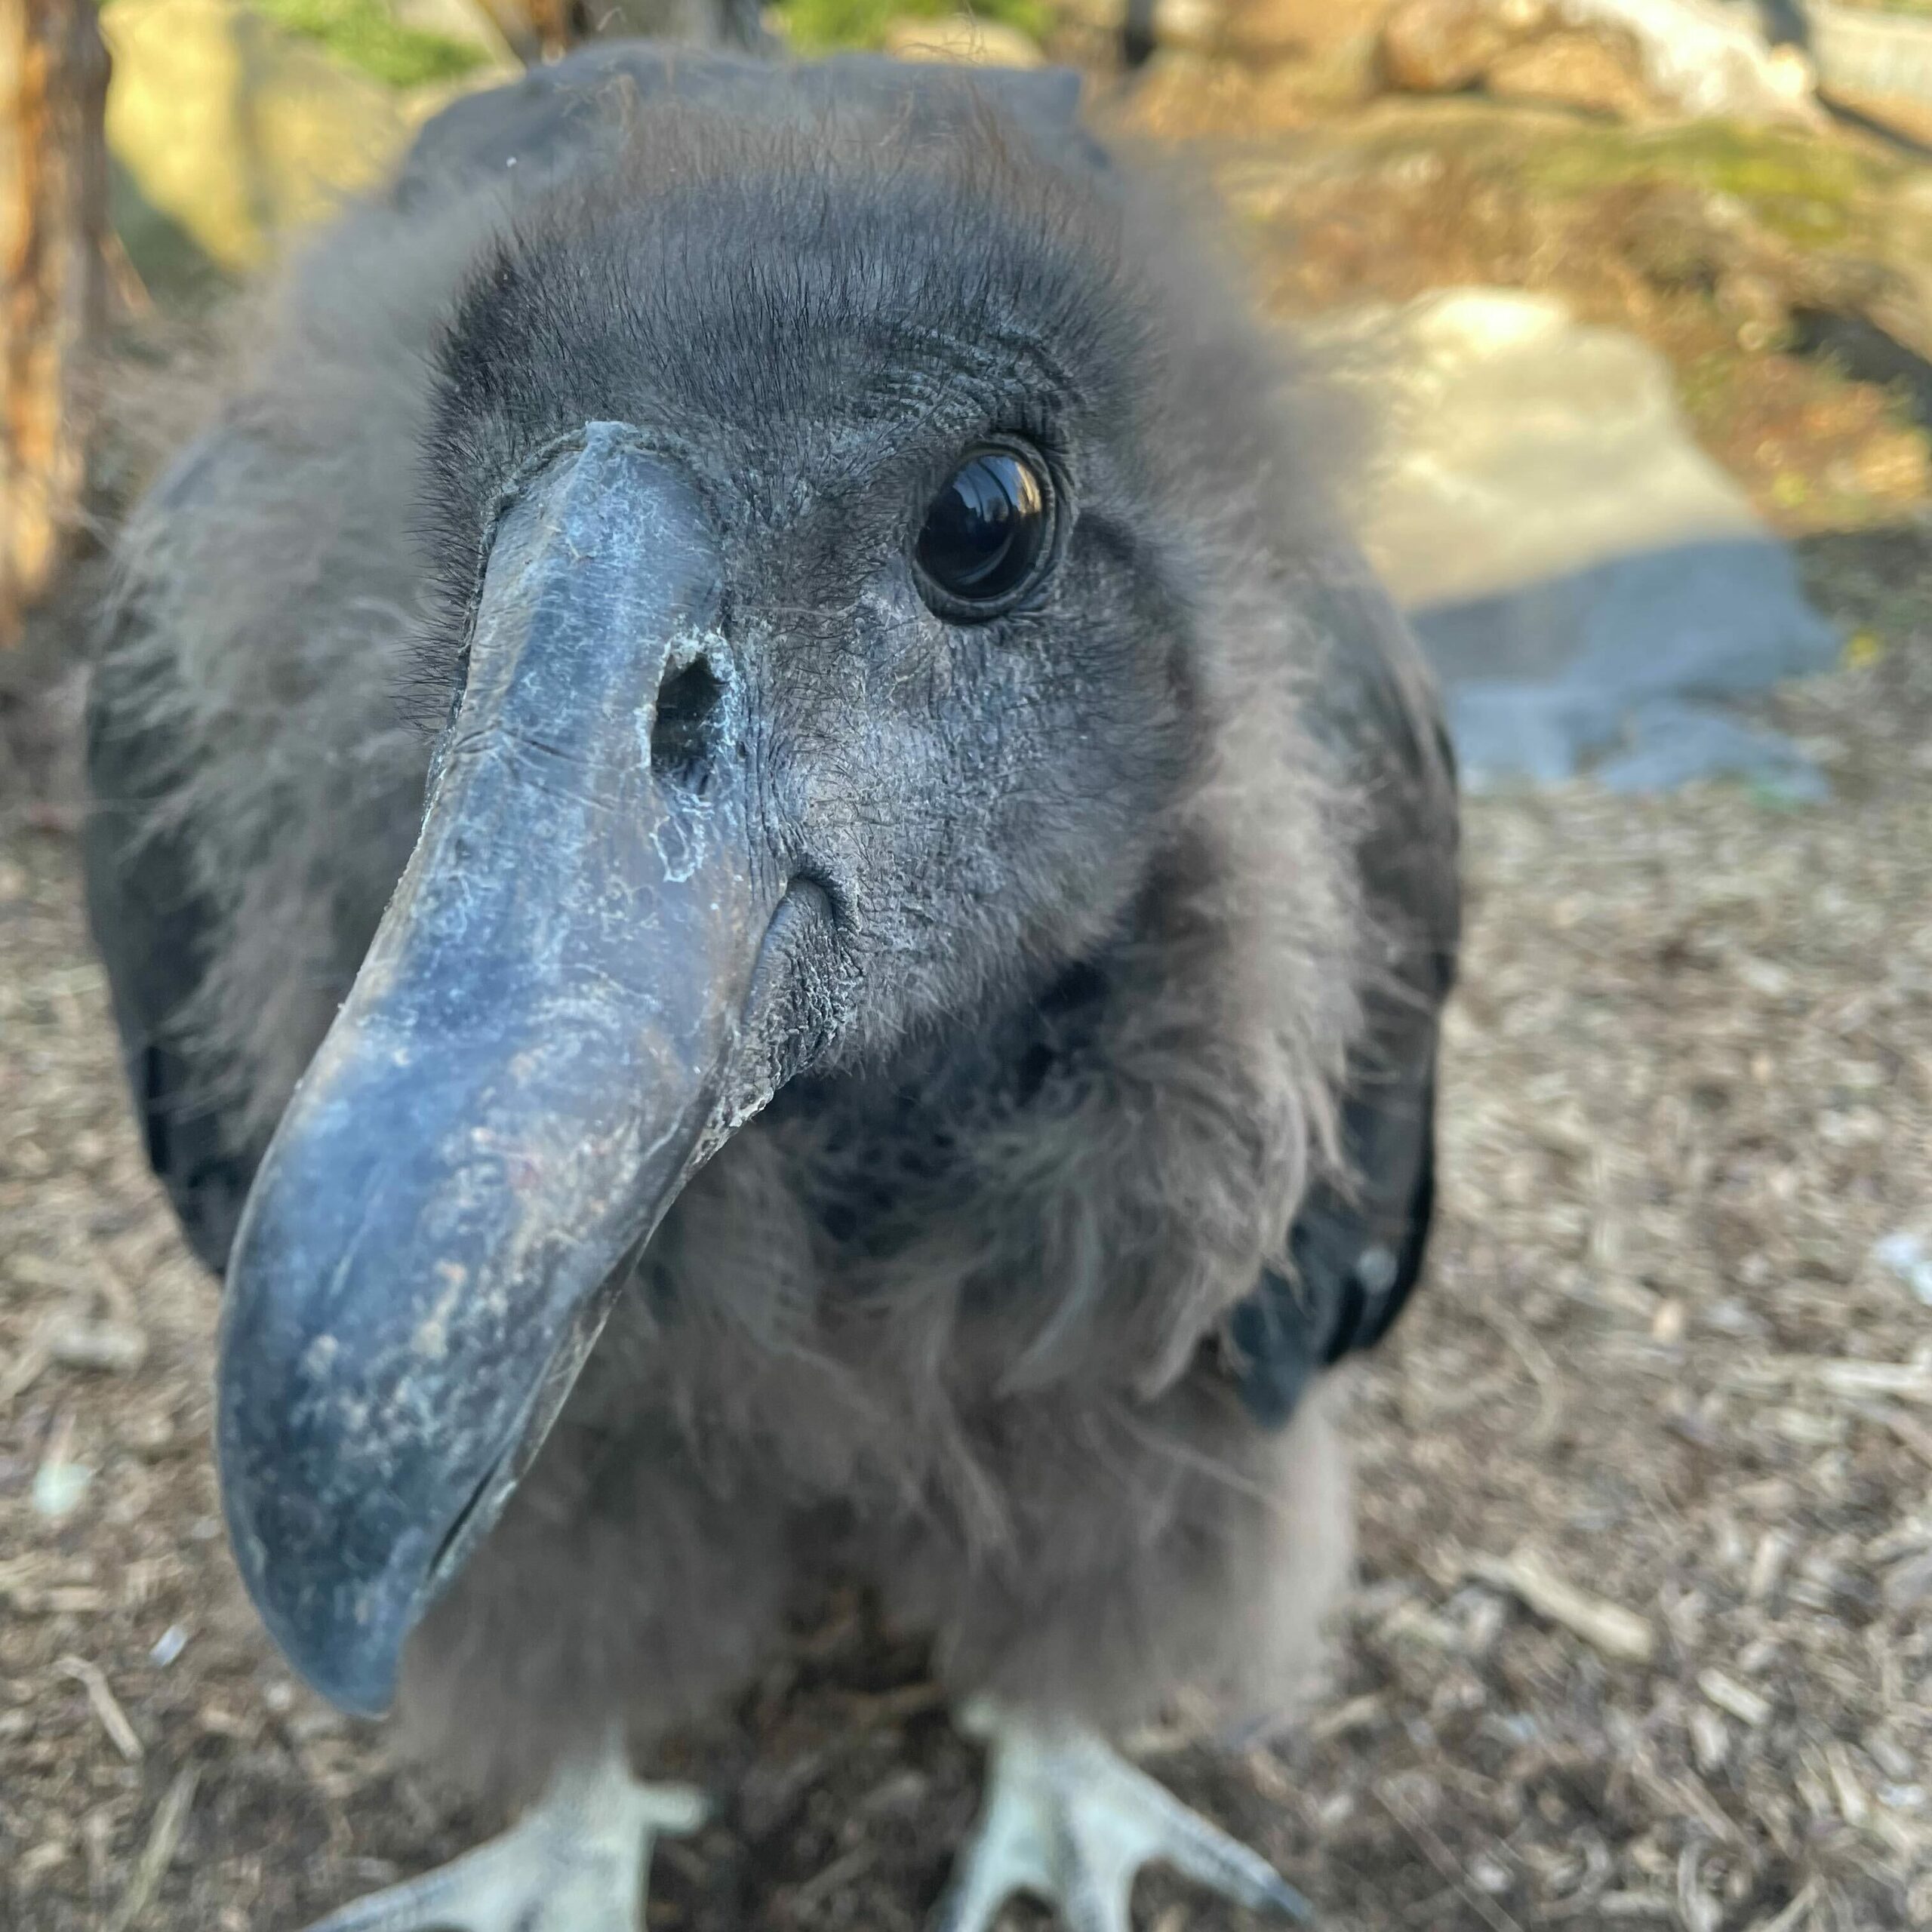 Marijo, the Andean Condor, at the National Aviary looking directly into the camera.